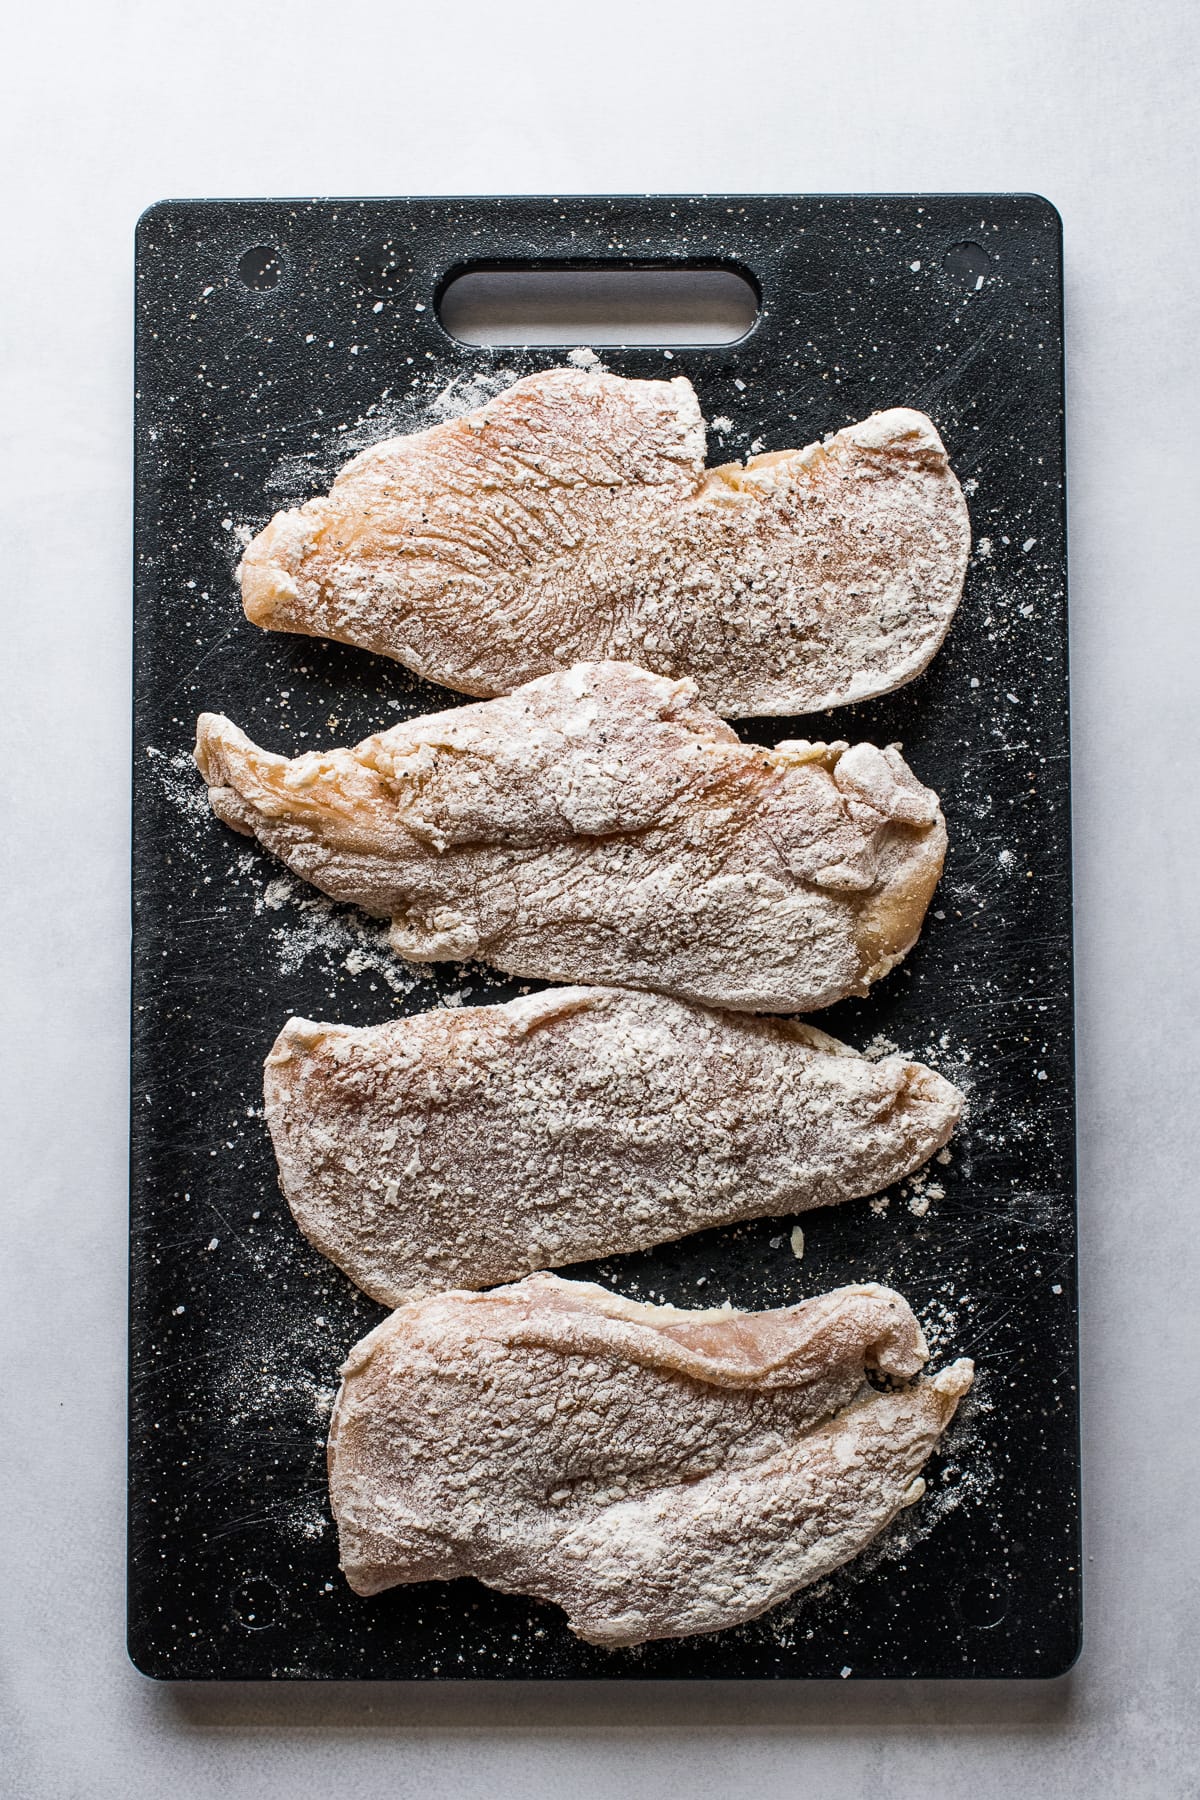 Sliced chicken breasts coated in flour for Pollo en Chipotle.